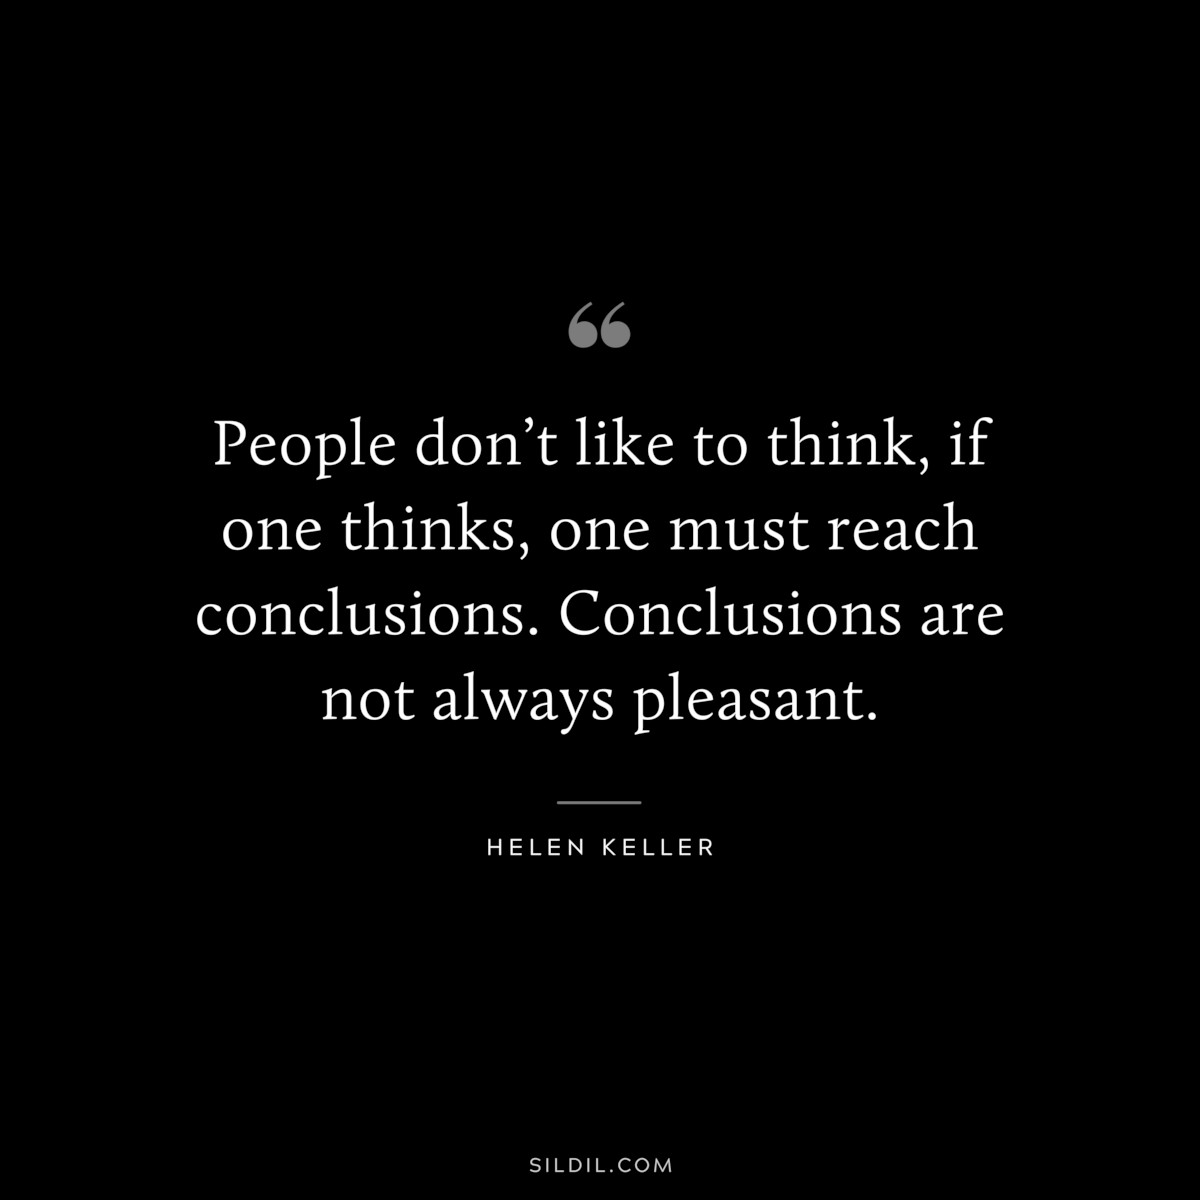 People don’t like to think, if one thinks, one must reach conclusions. Conclusions are not always pleasant. ― Helen Keller